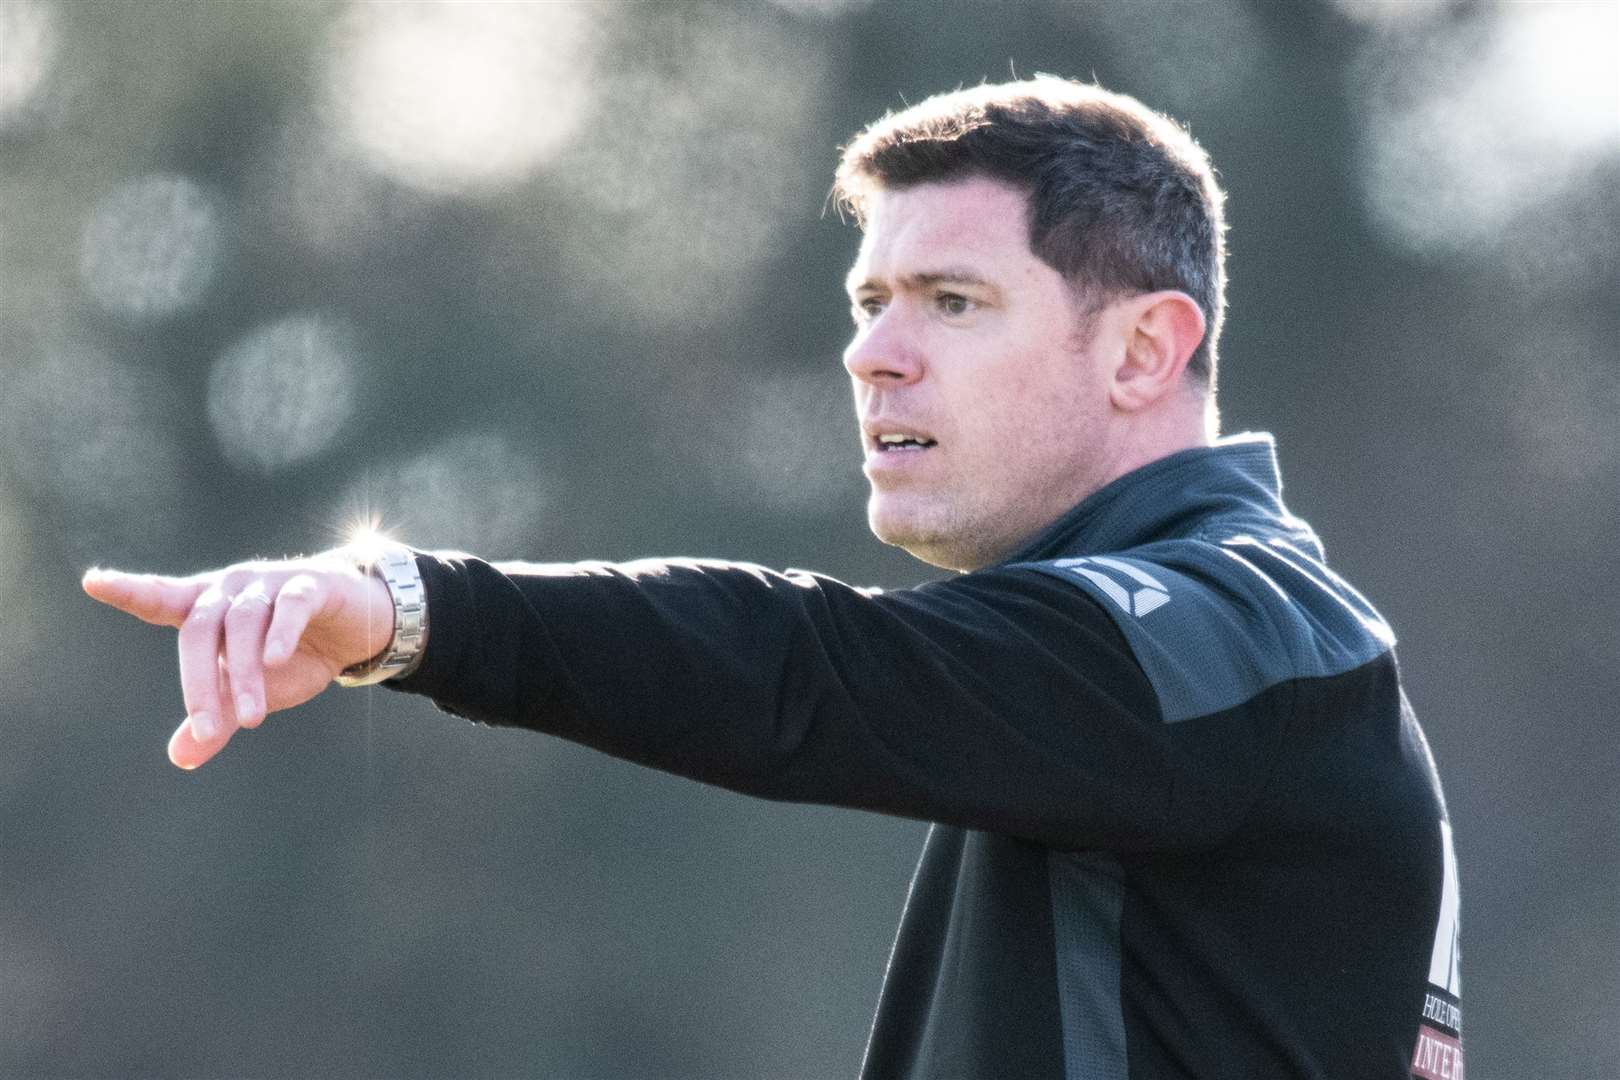 Buckie Thistle manager Graeme Stewart was delighted with the performance.